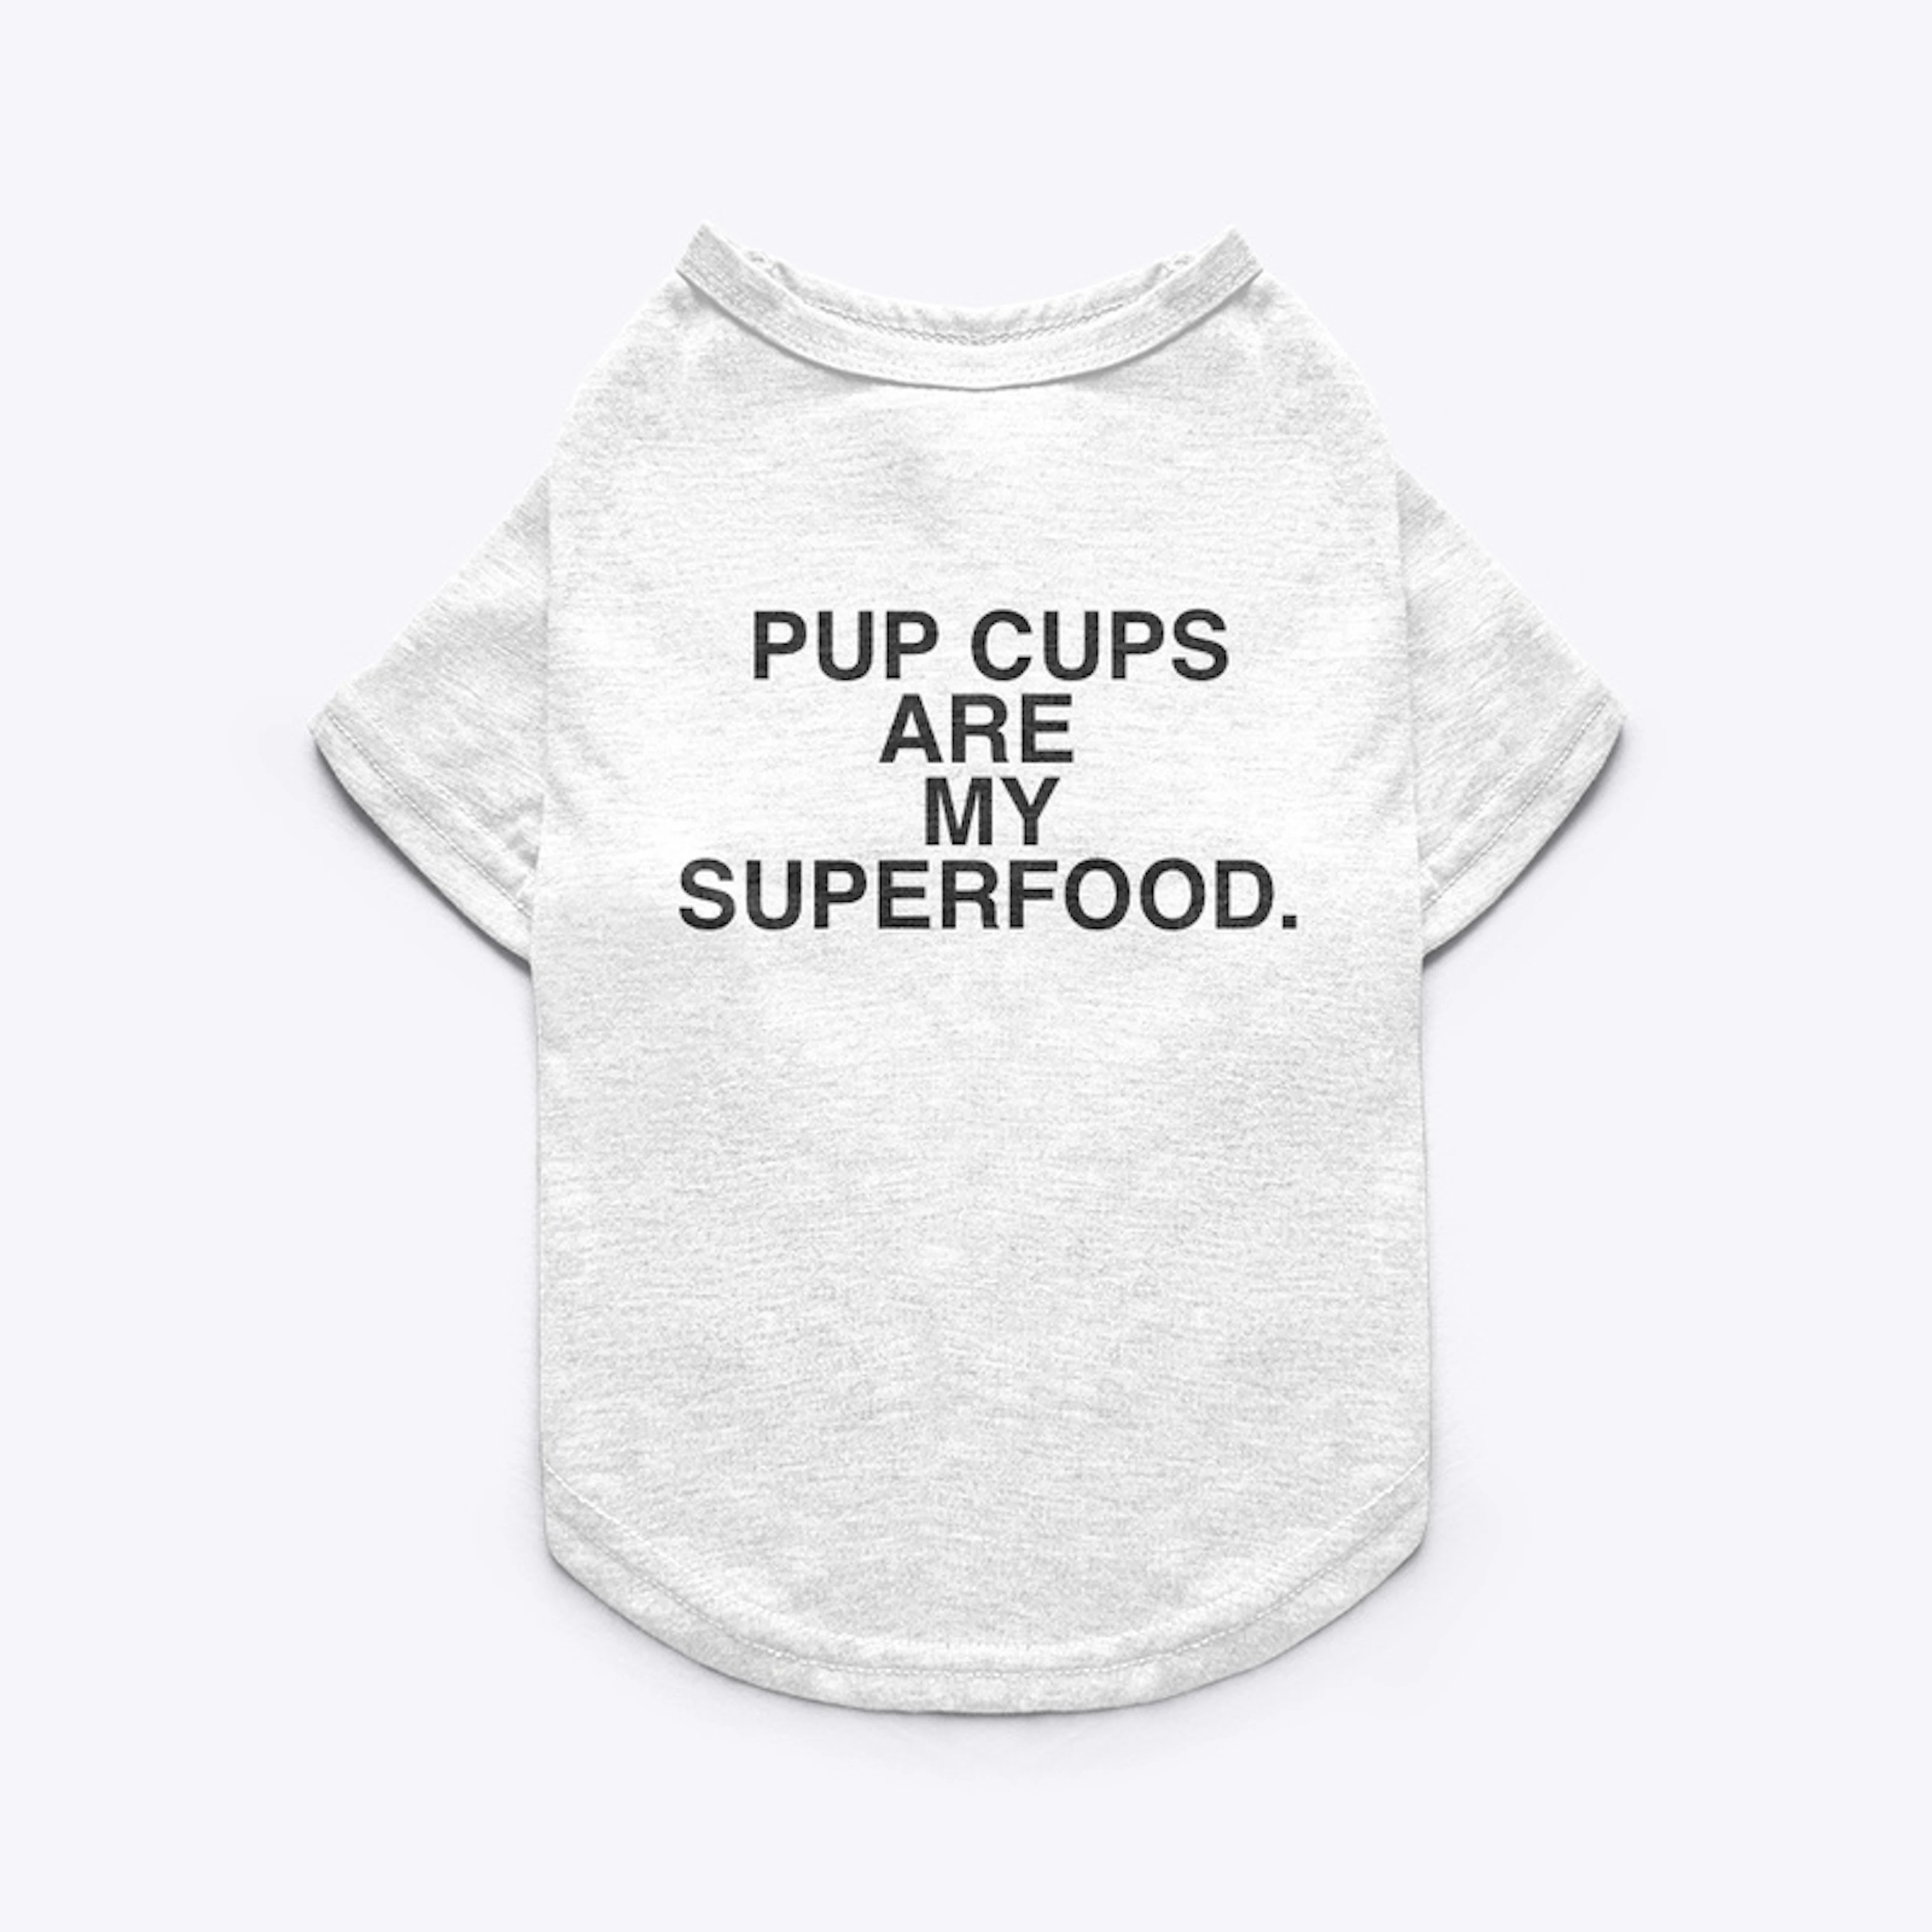 Funny PUP CUP dog shirt